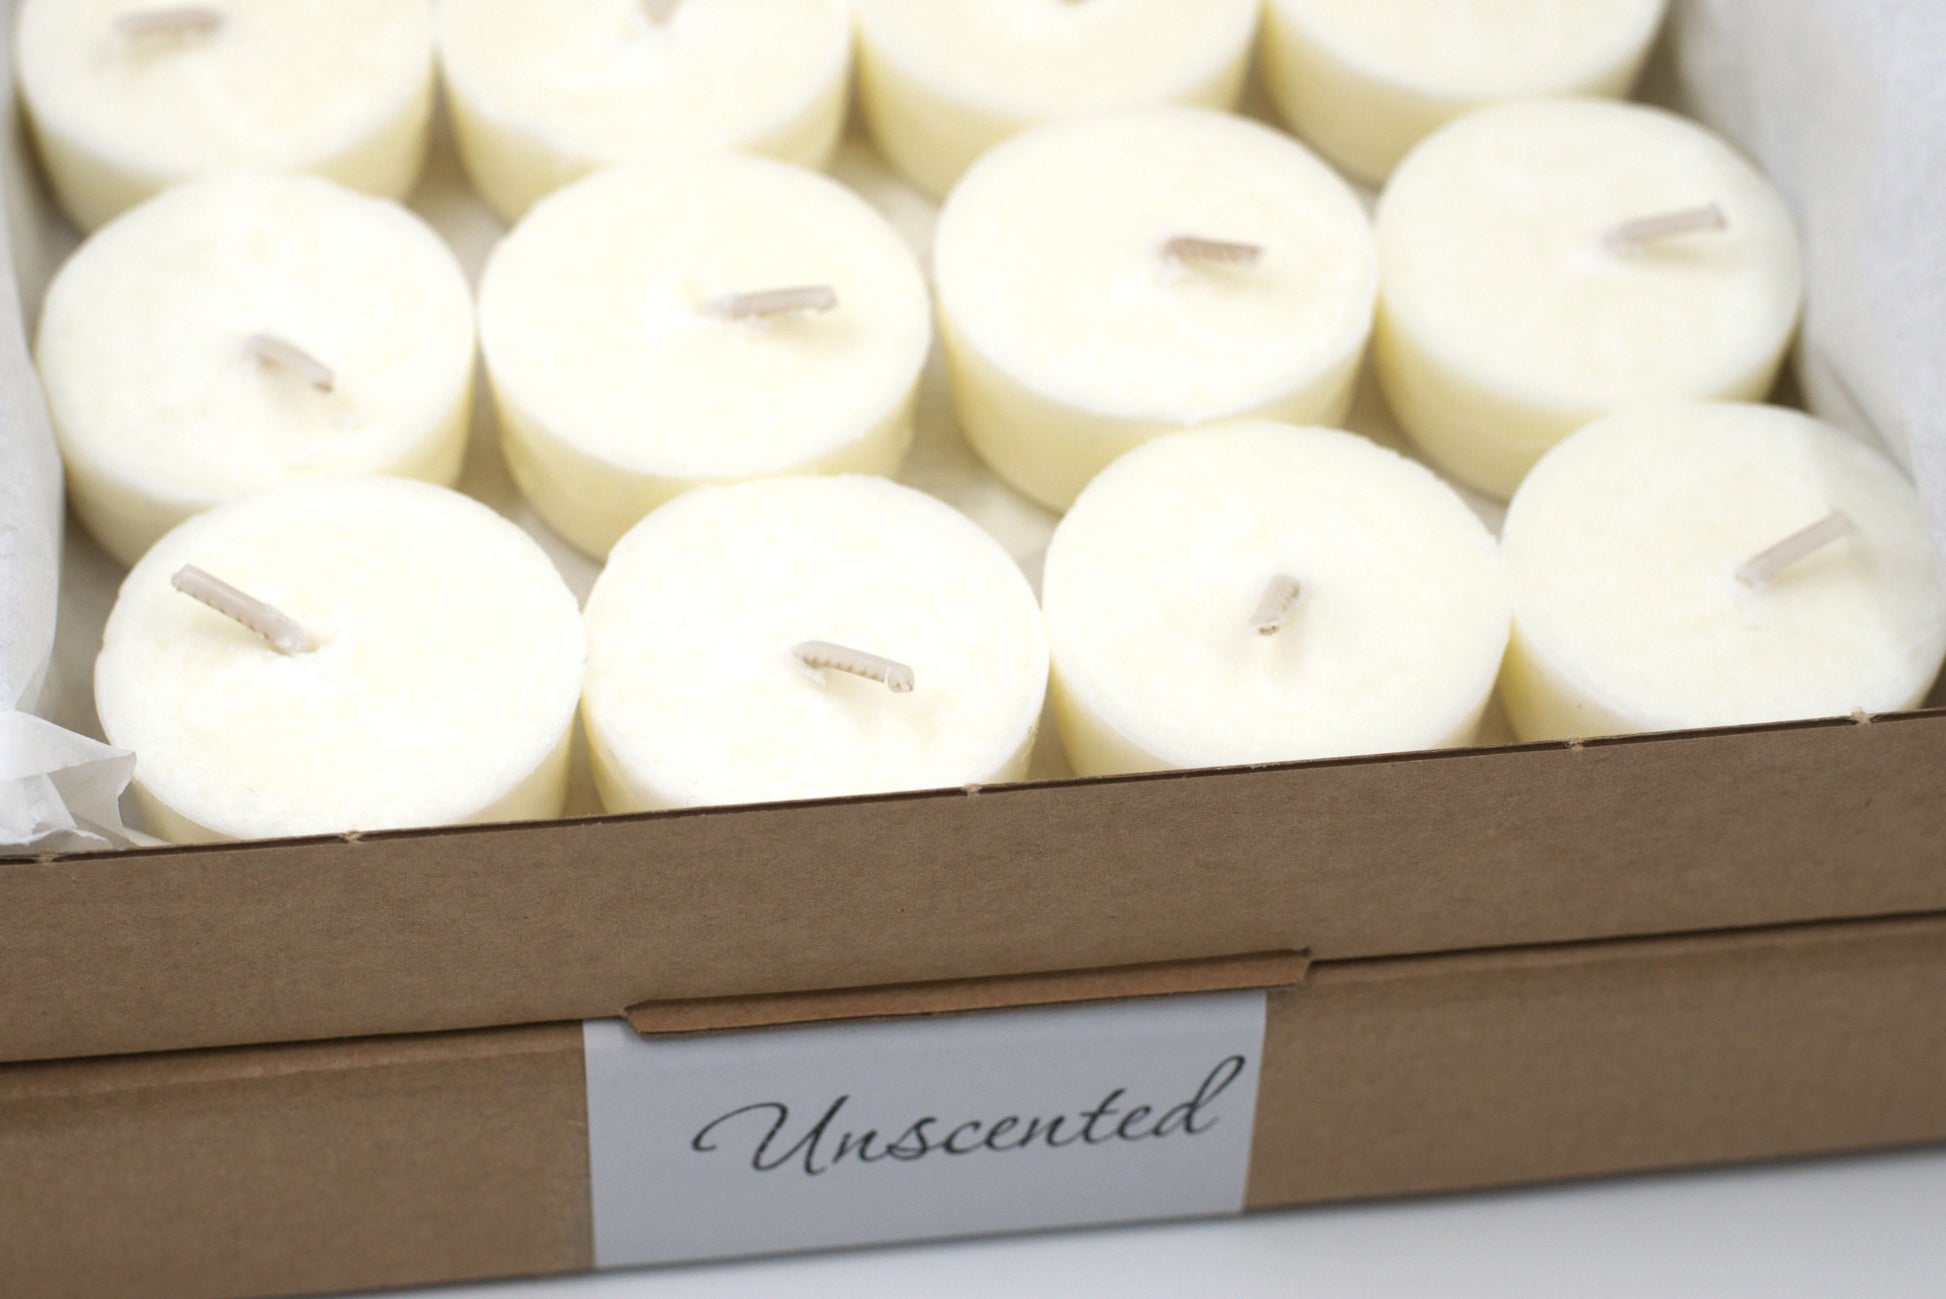 Detailed view of twelve unscented tea light candles in a cardboard box, showcasing eco-friendly and vegan tea light refills for aromatherapy and home use.